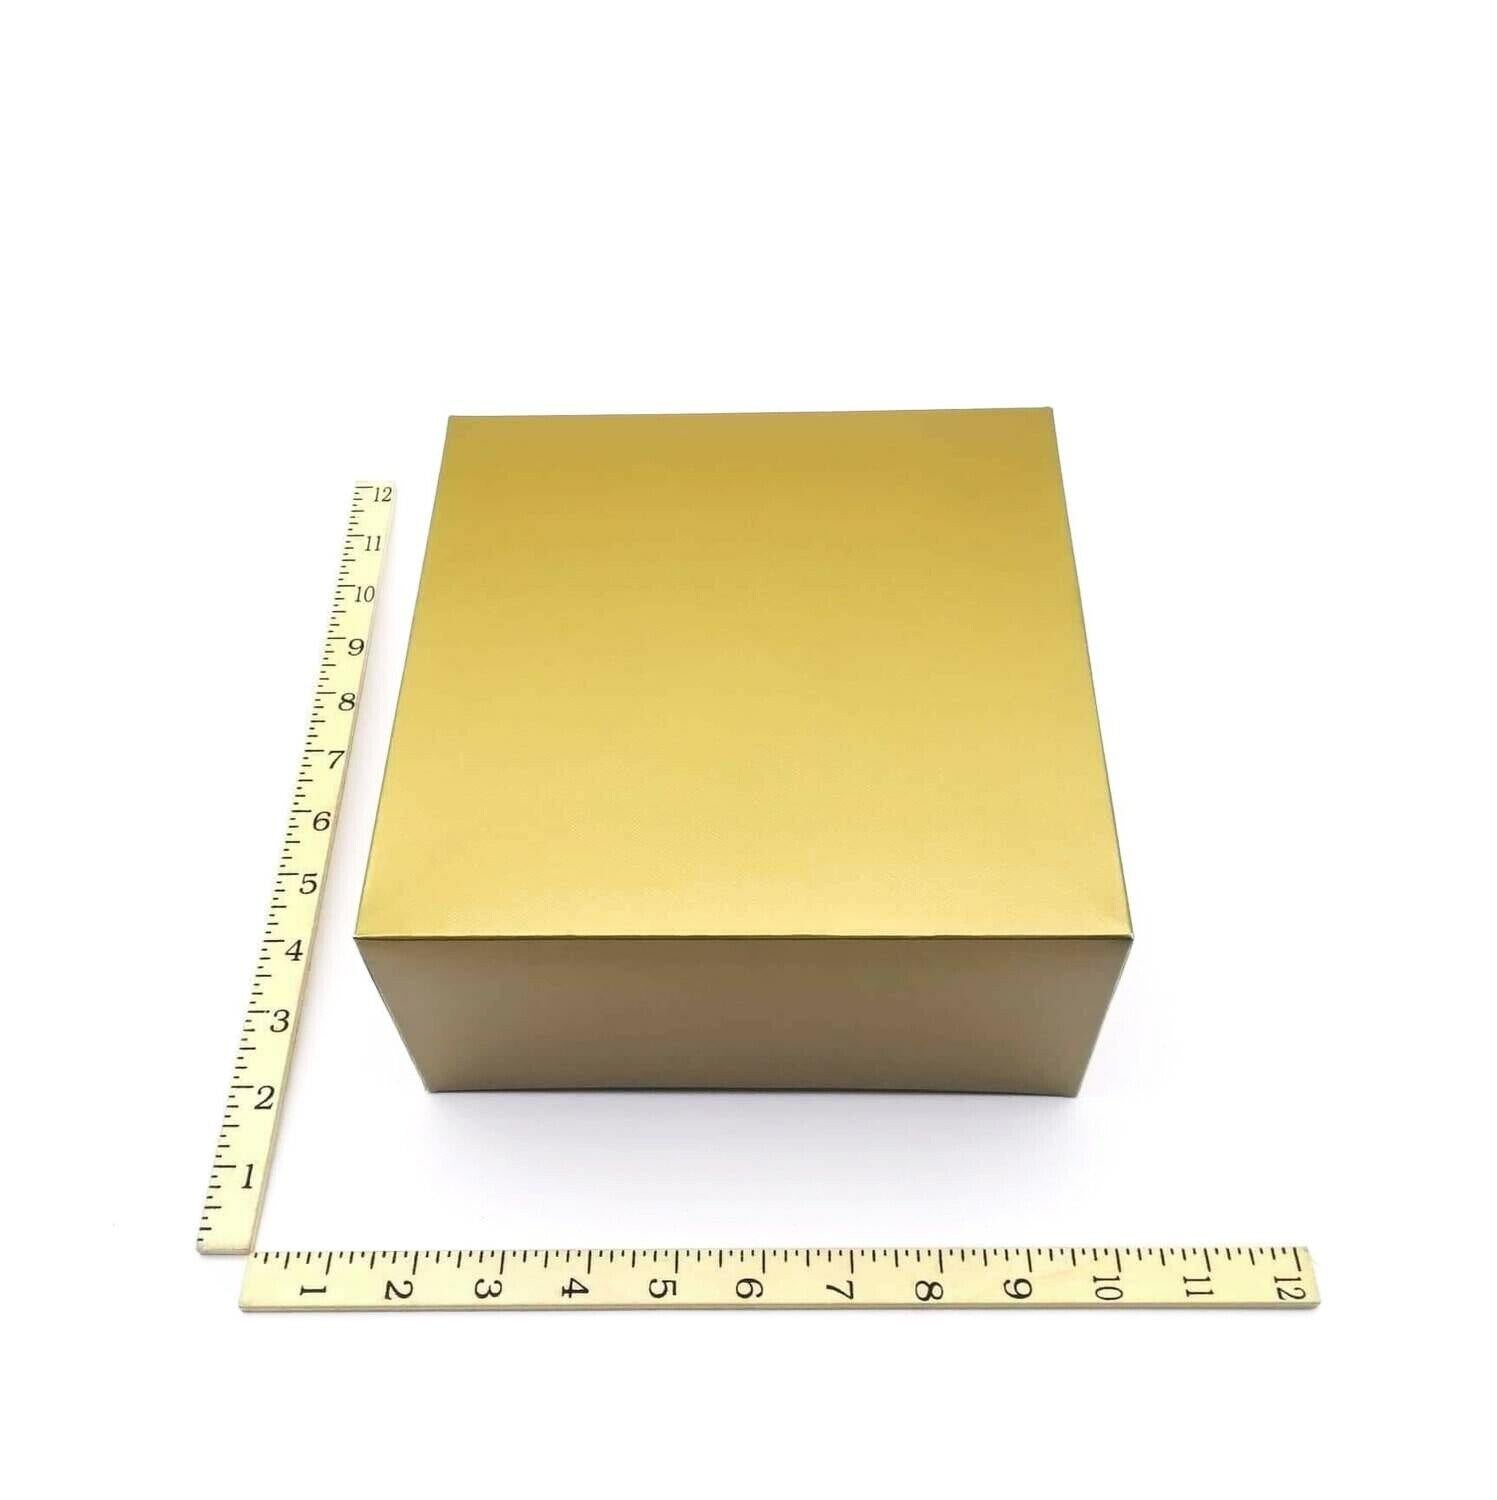 8 X 8 X 4 ALL GOLD 20`S - Kitchen Convenience: Ingredients & Supplies Delivery